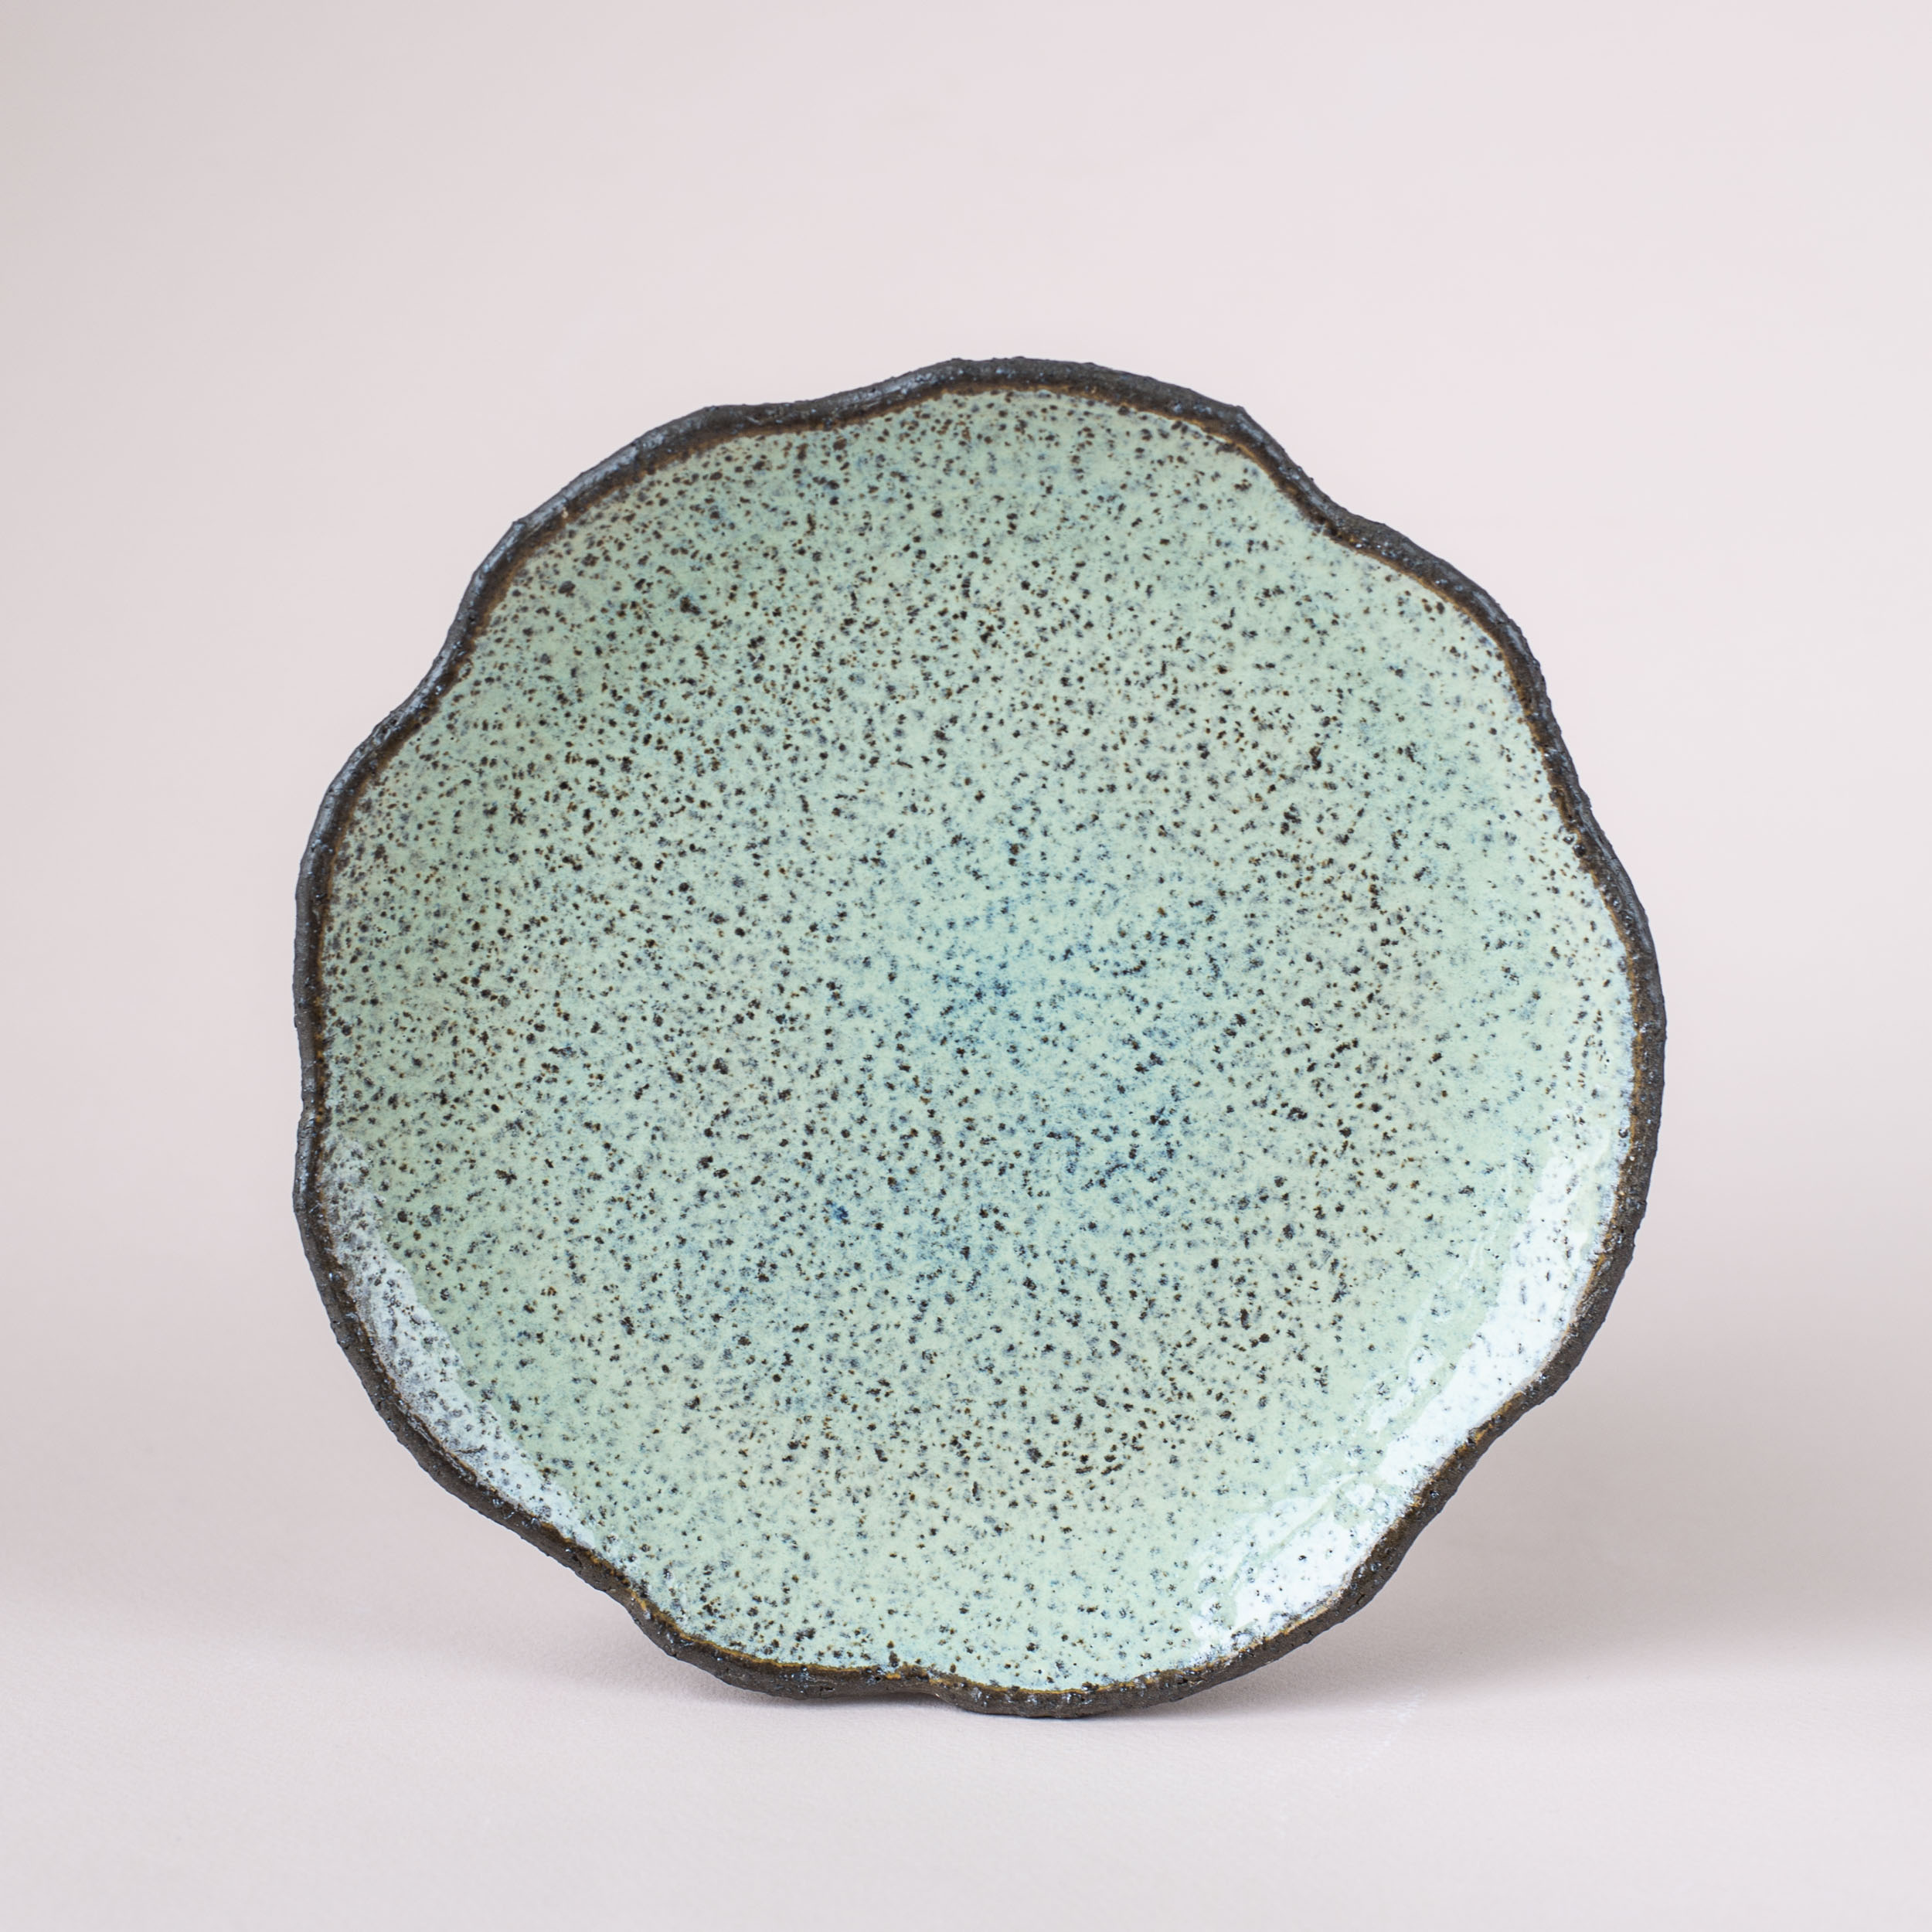 Turquoise chamotte plate, 21 cm